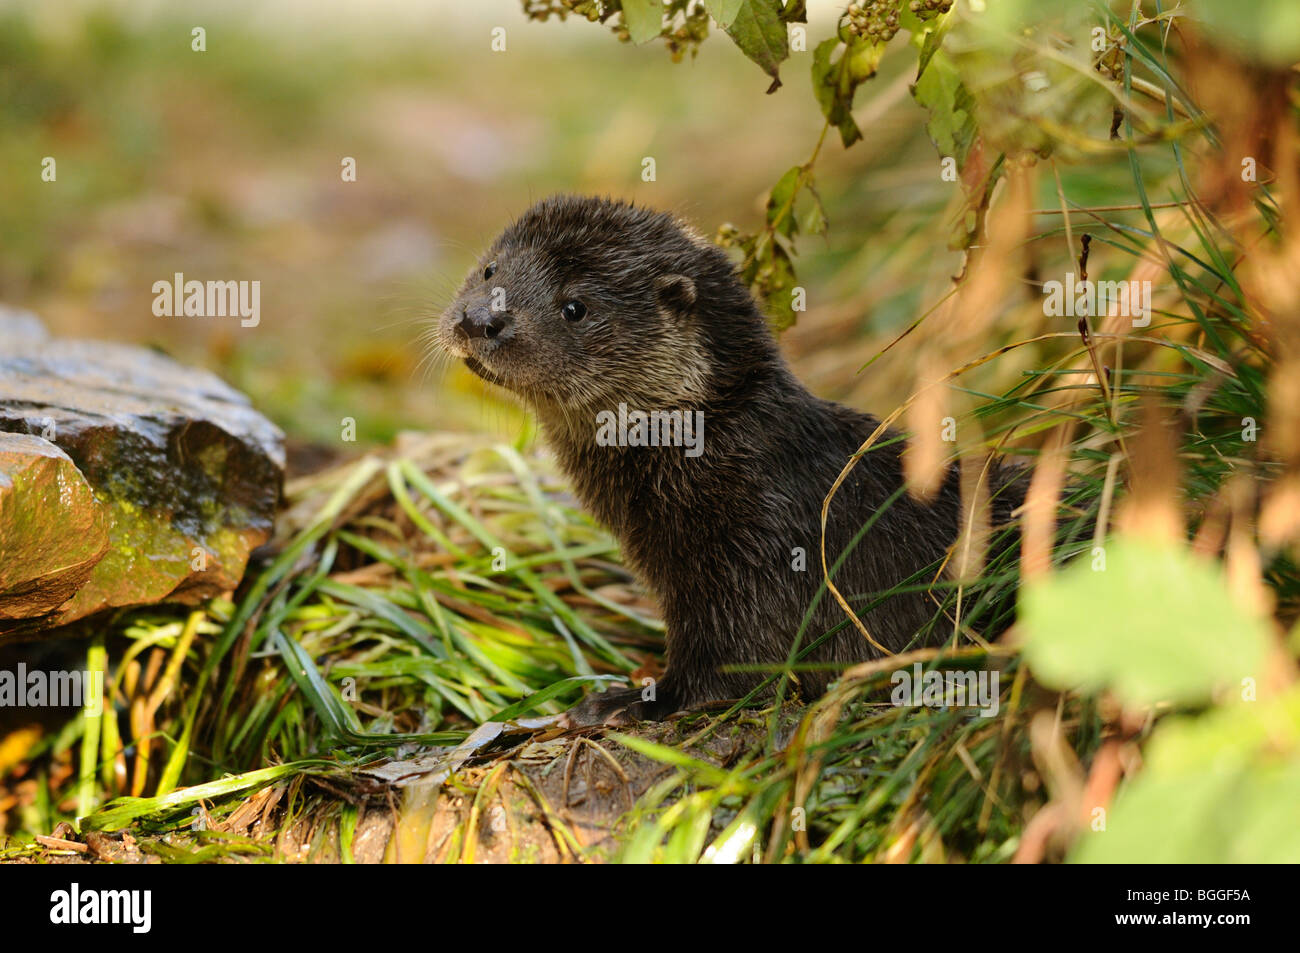 Young otter (Lutra lutra) in meadow, side view Stock Photo